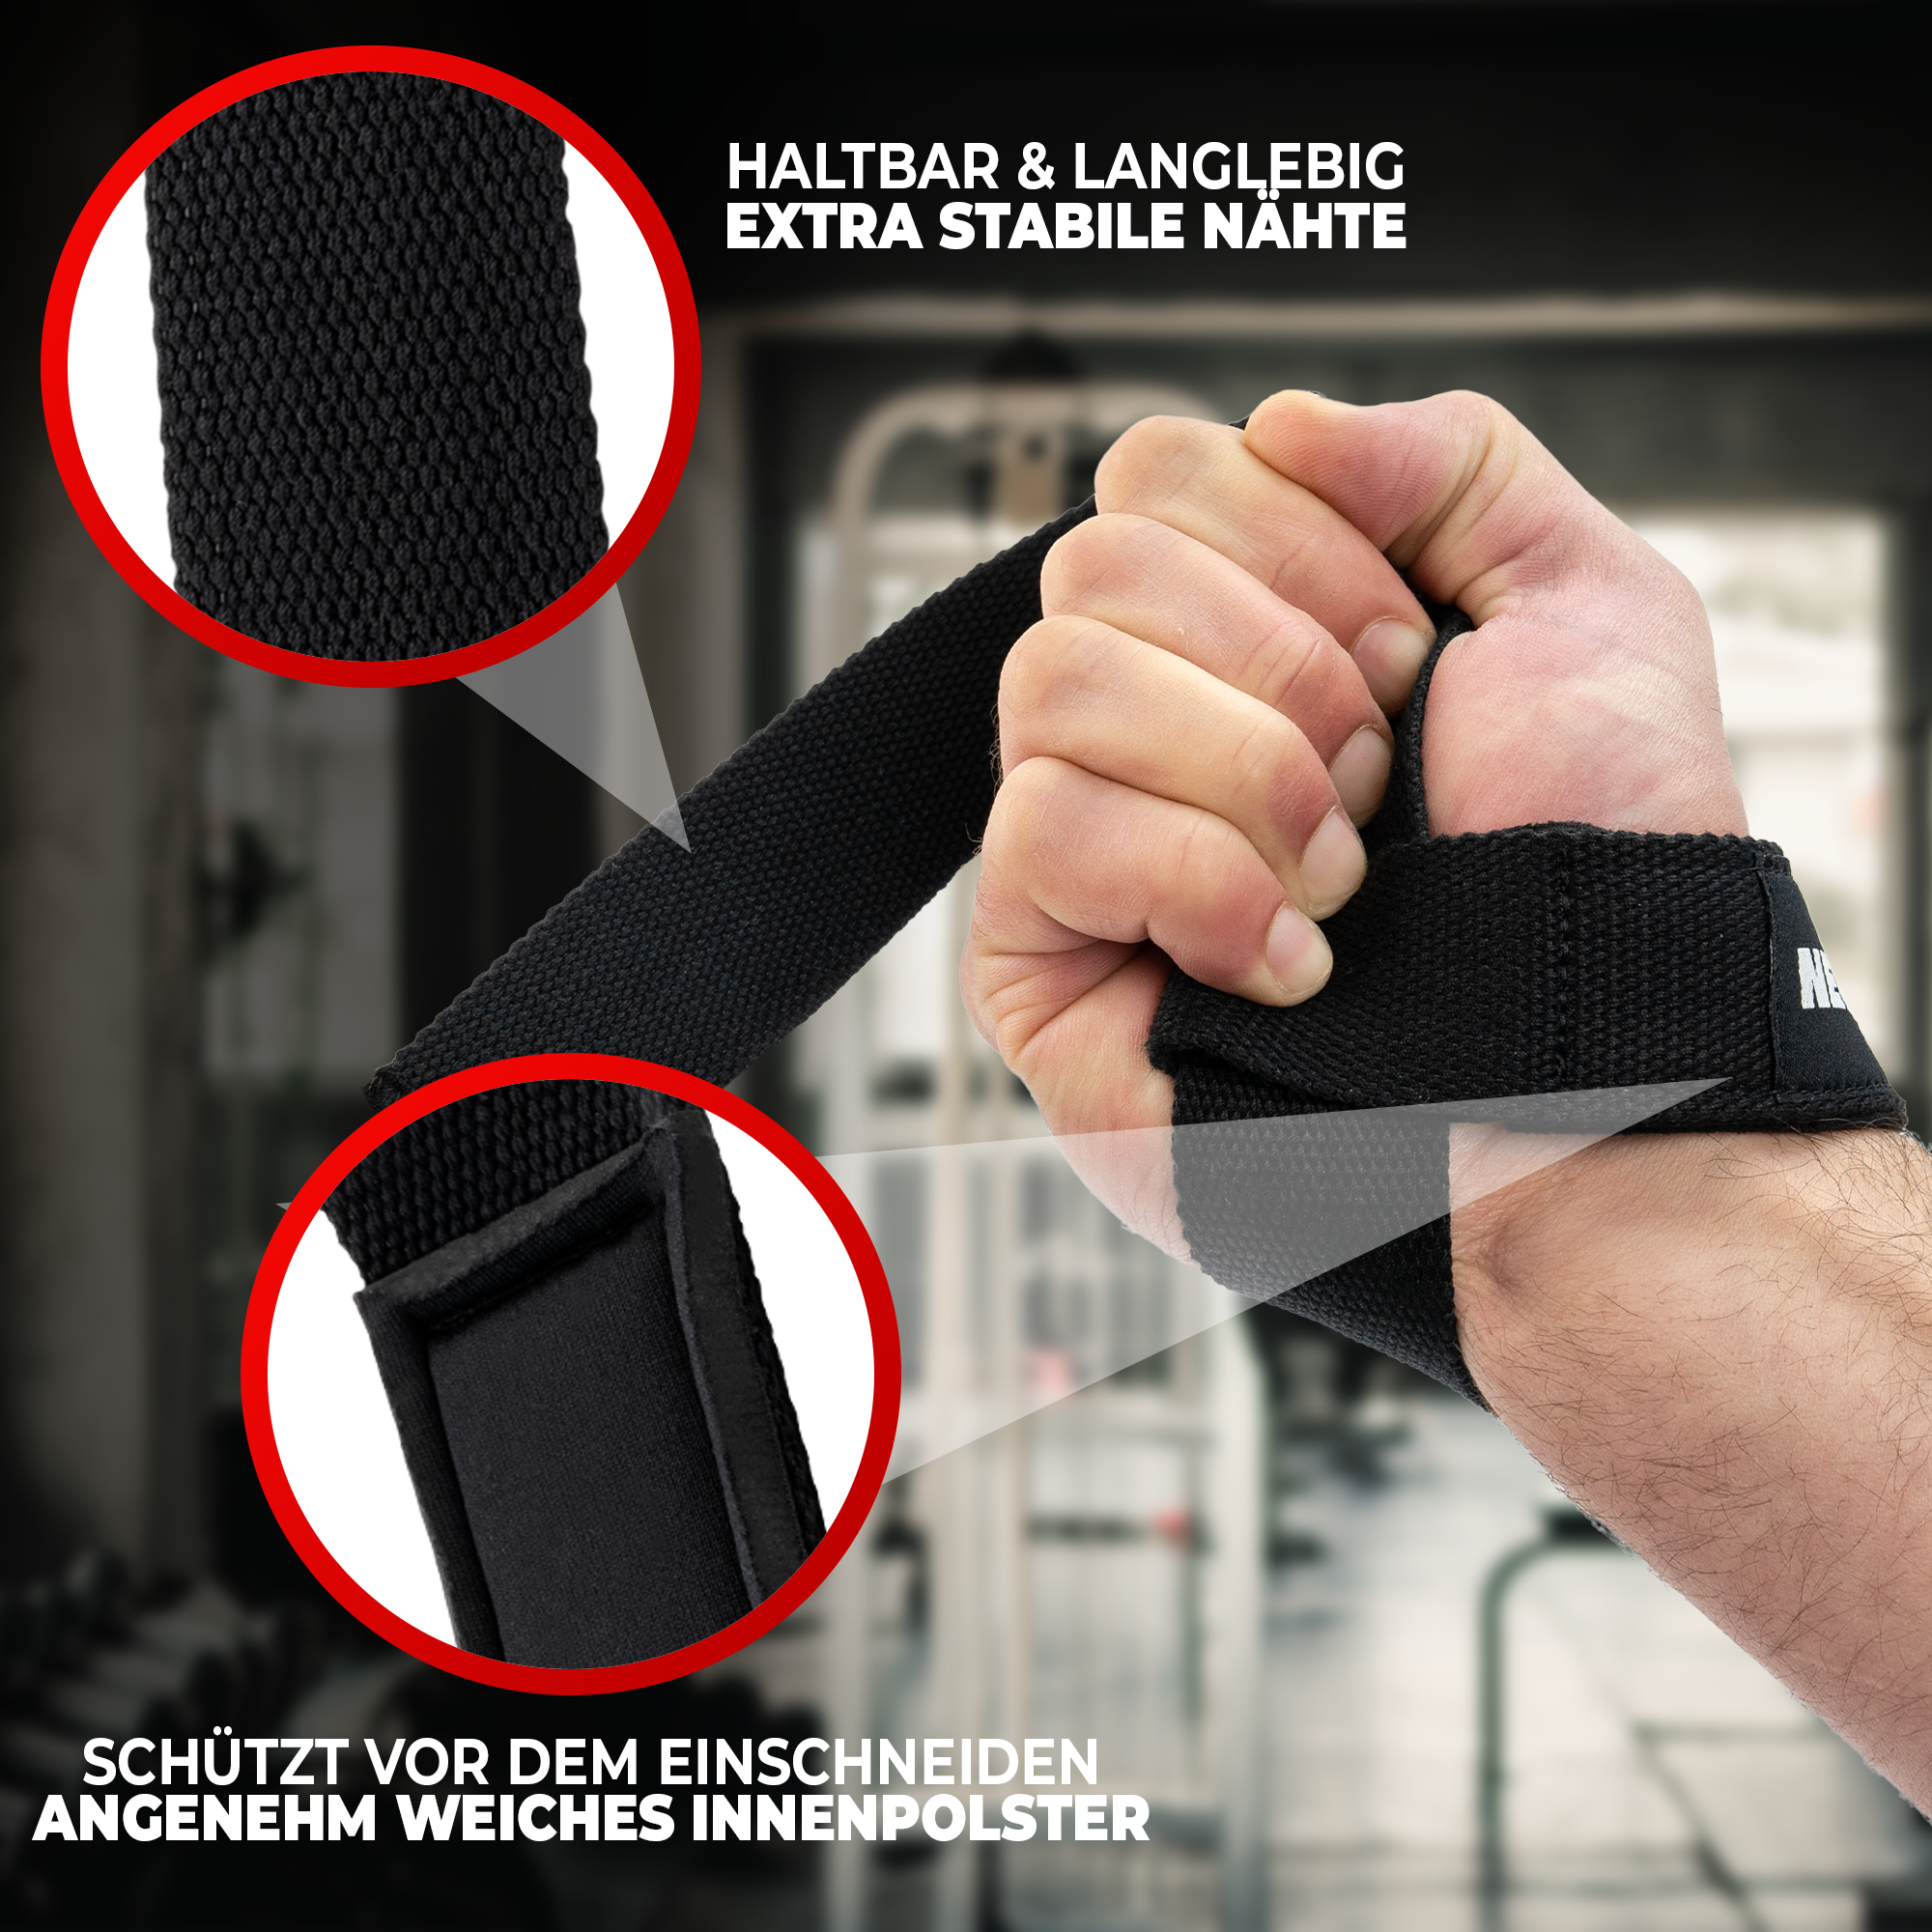 Padded lifting straps